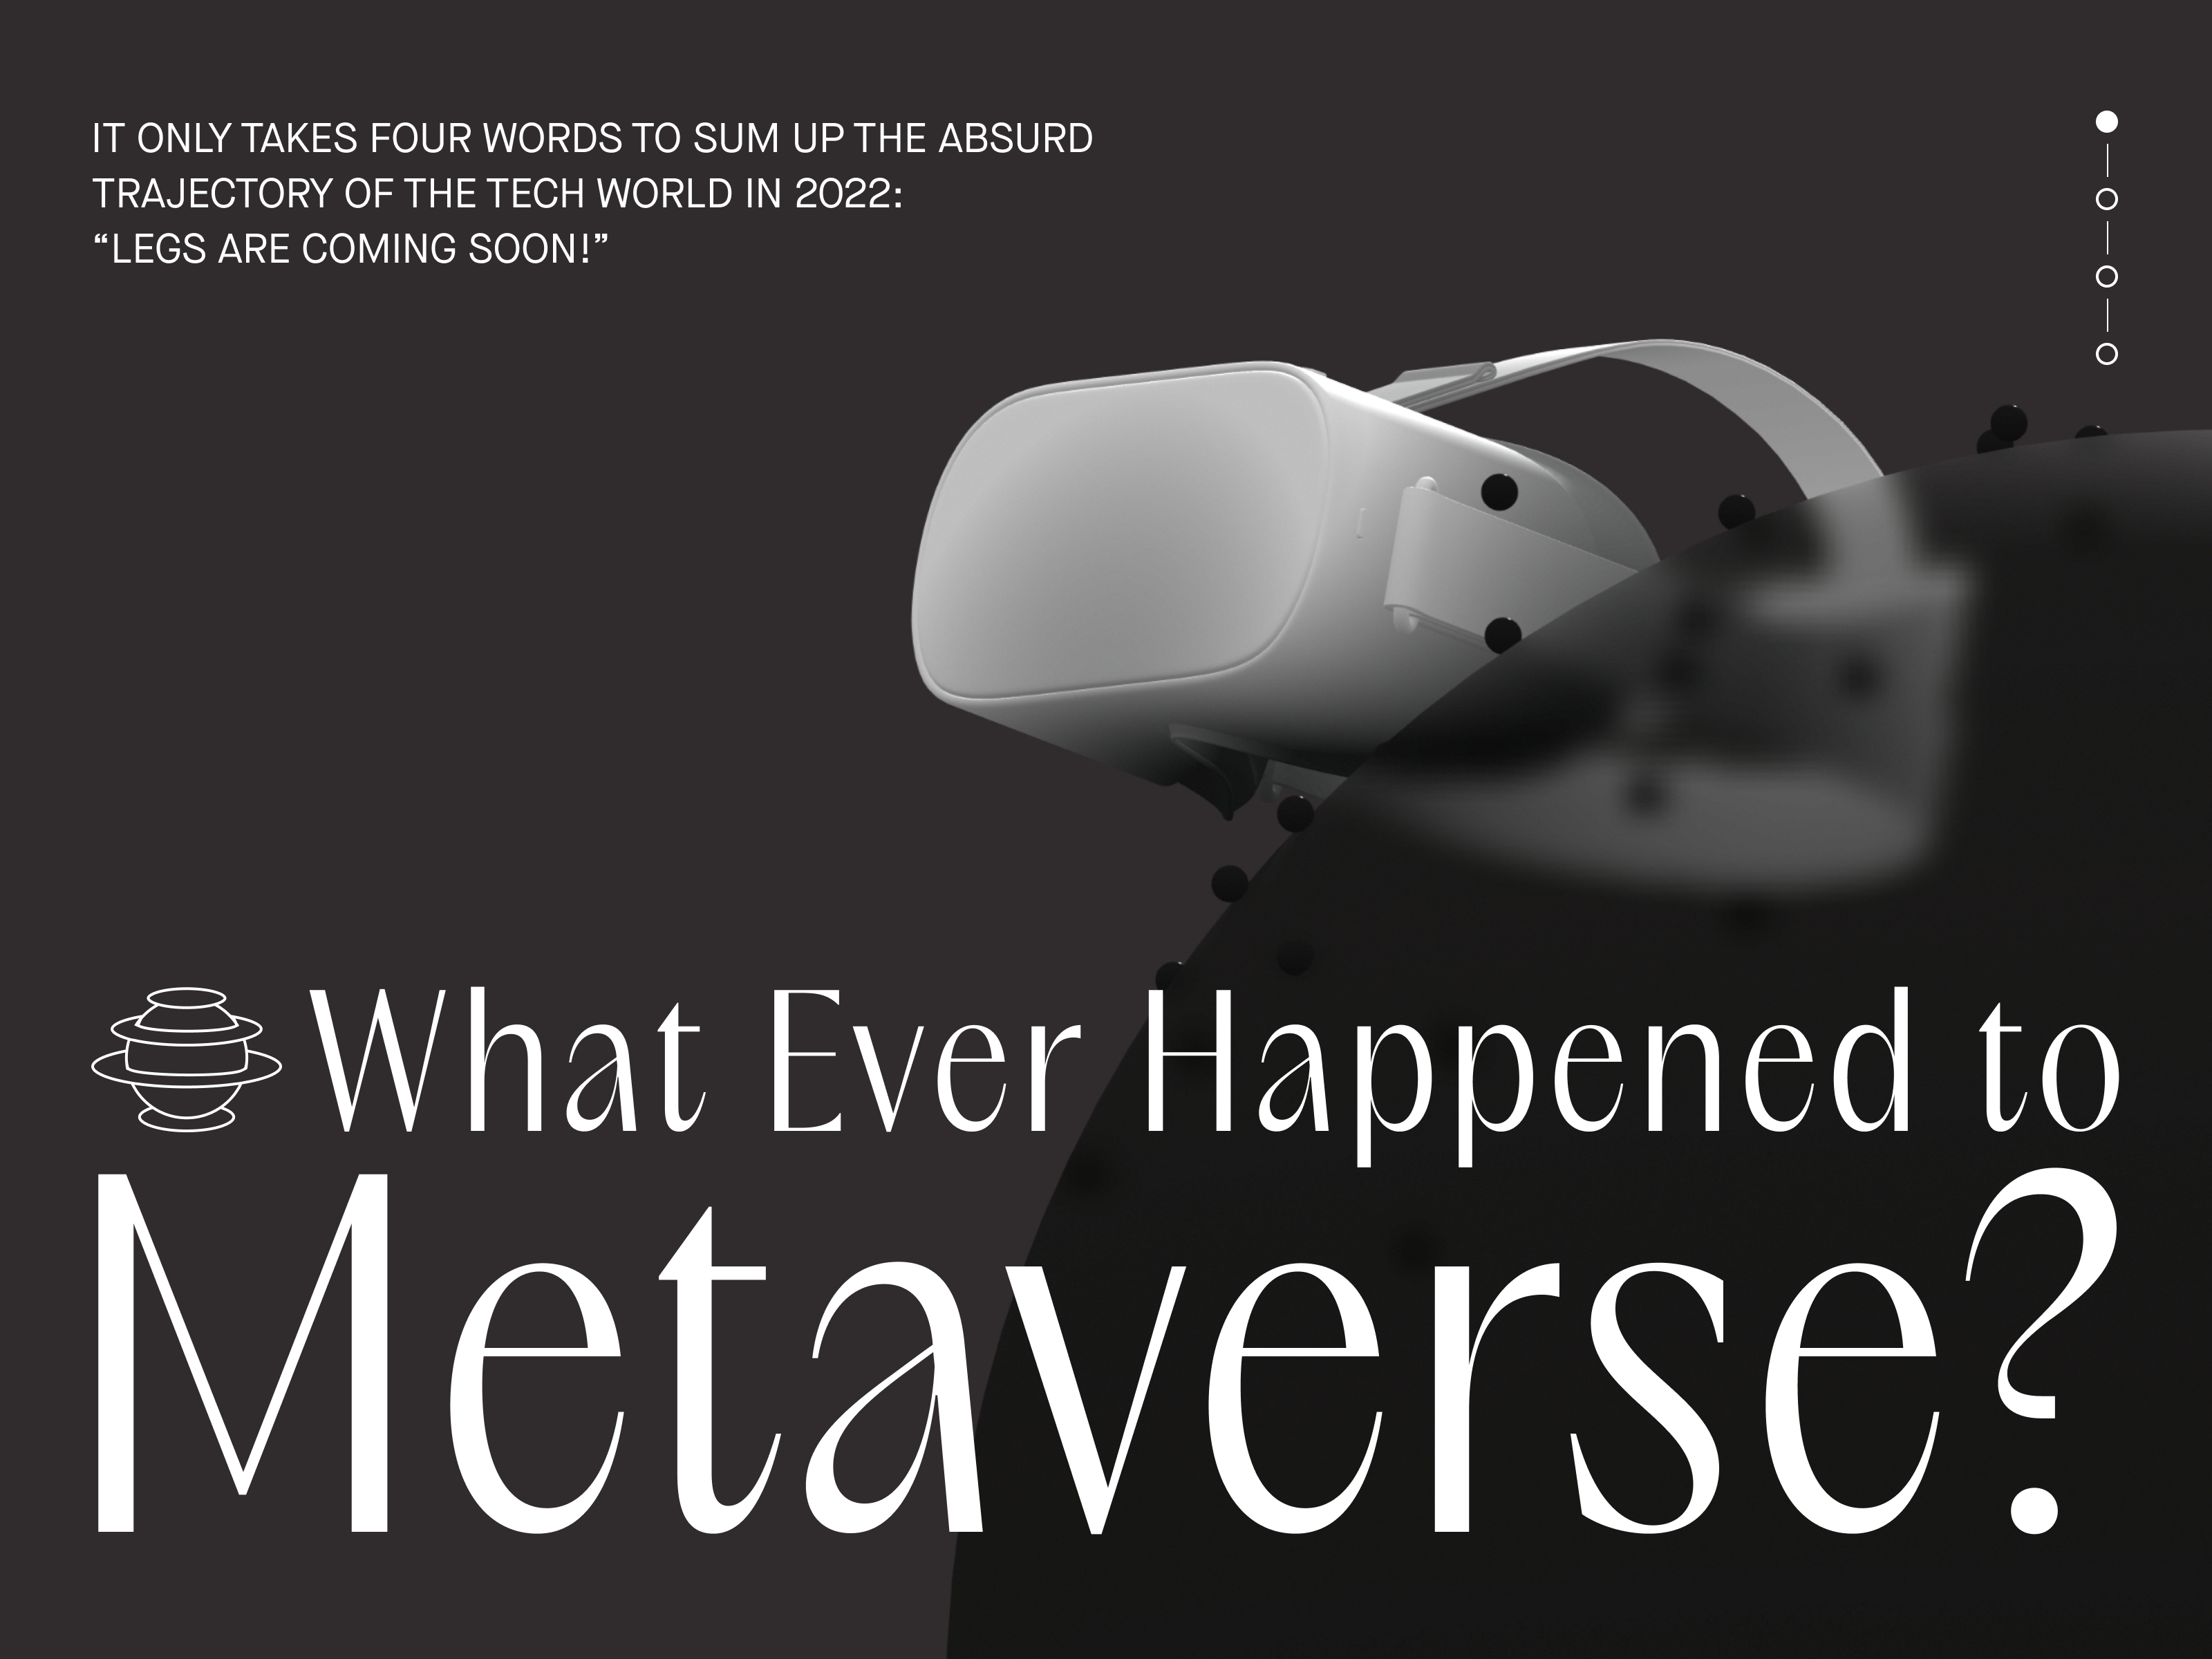 What Ever Happened to Metaverse? 🎬